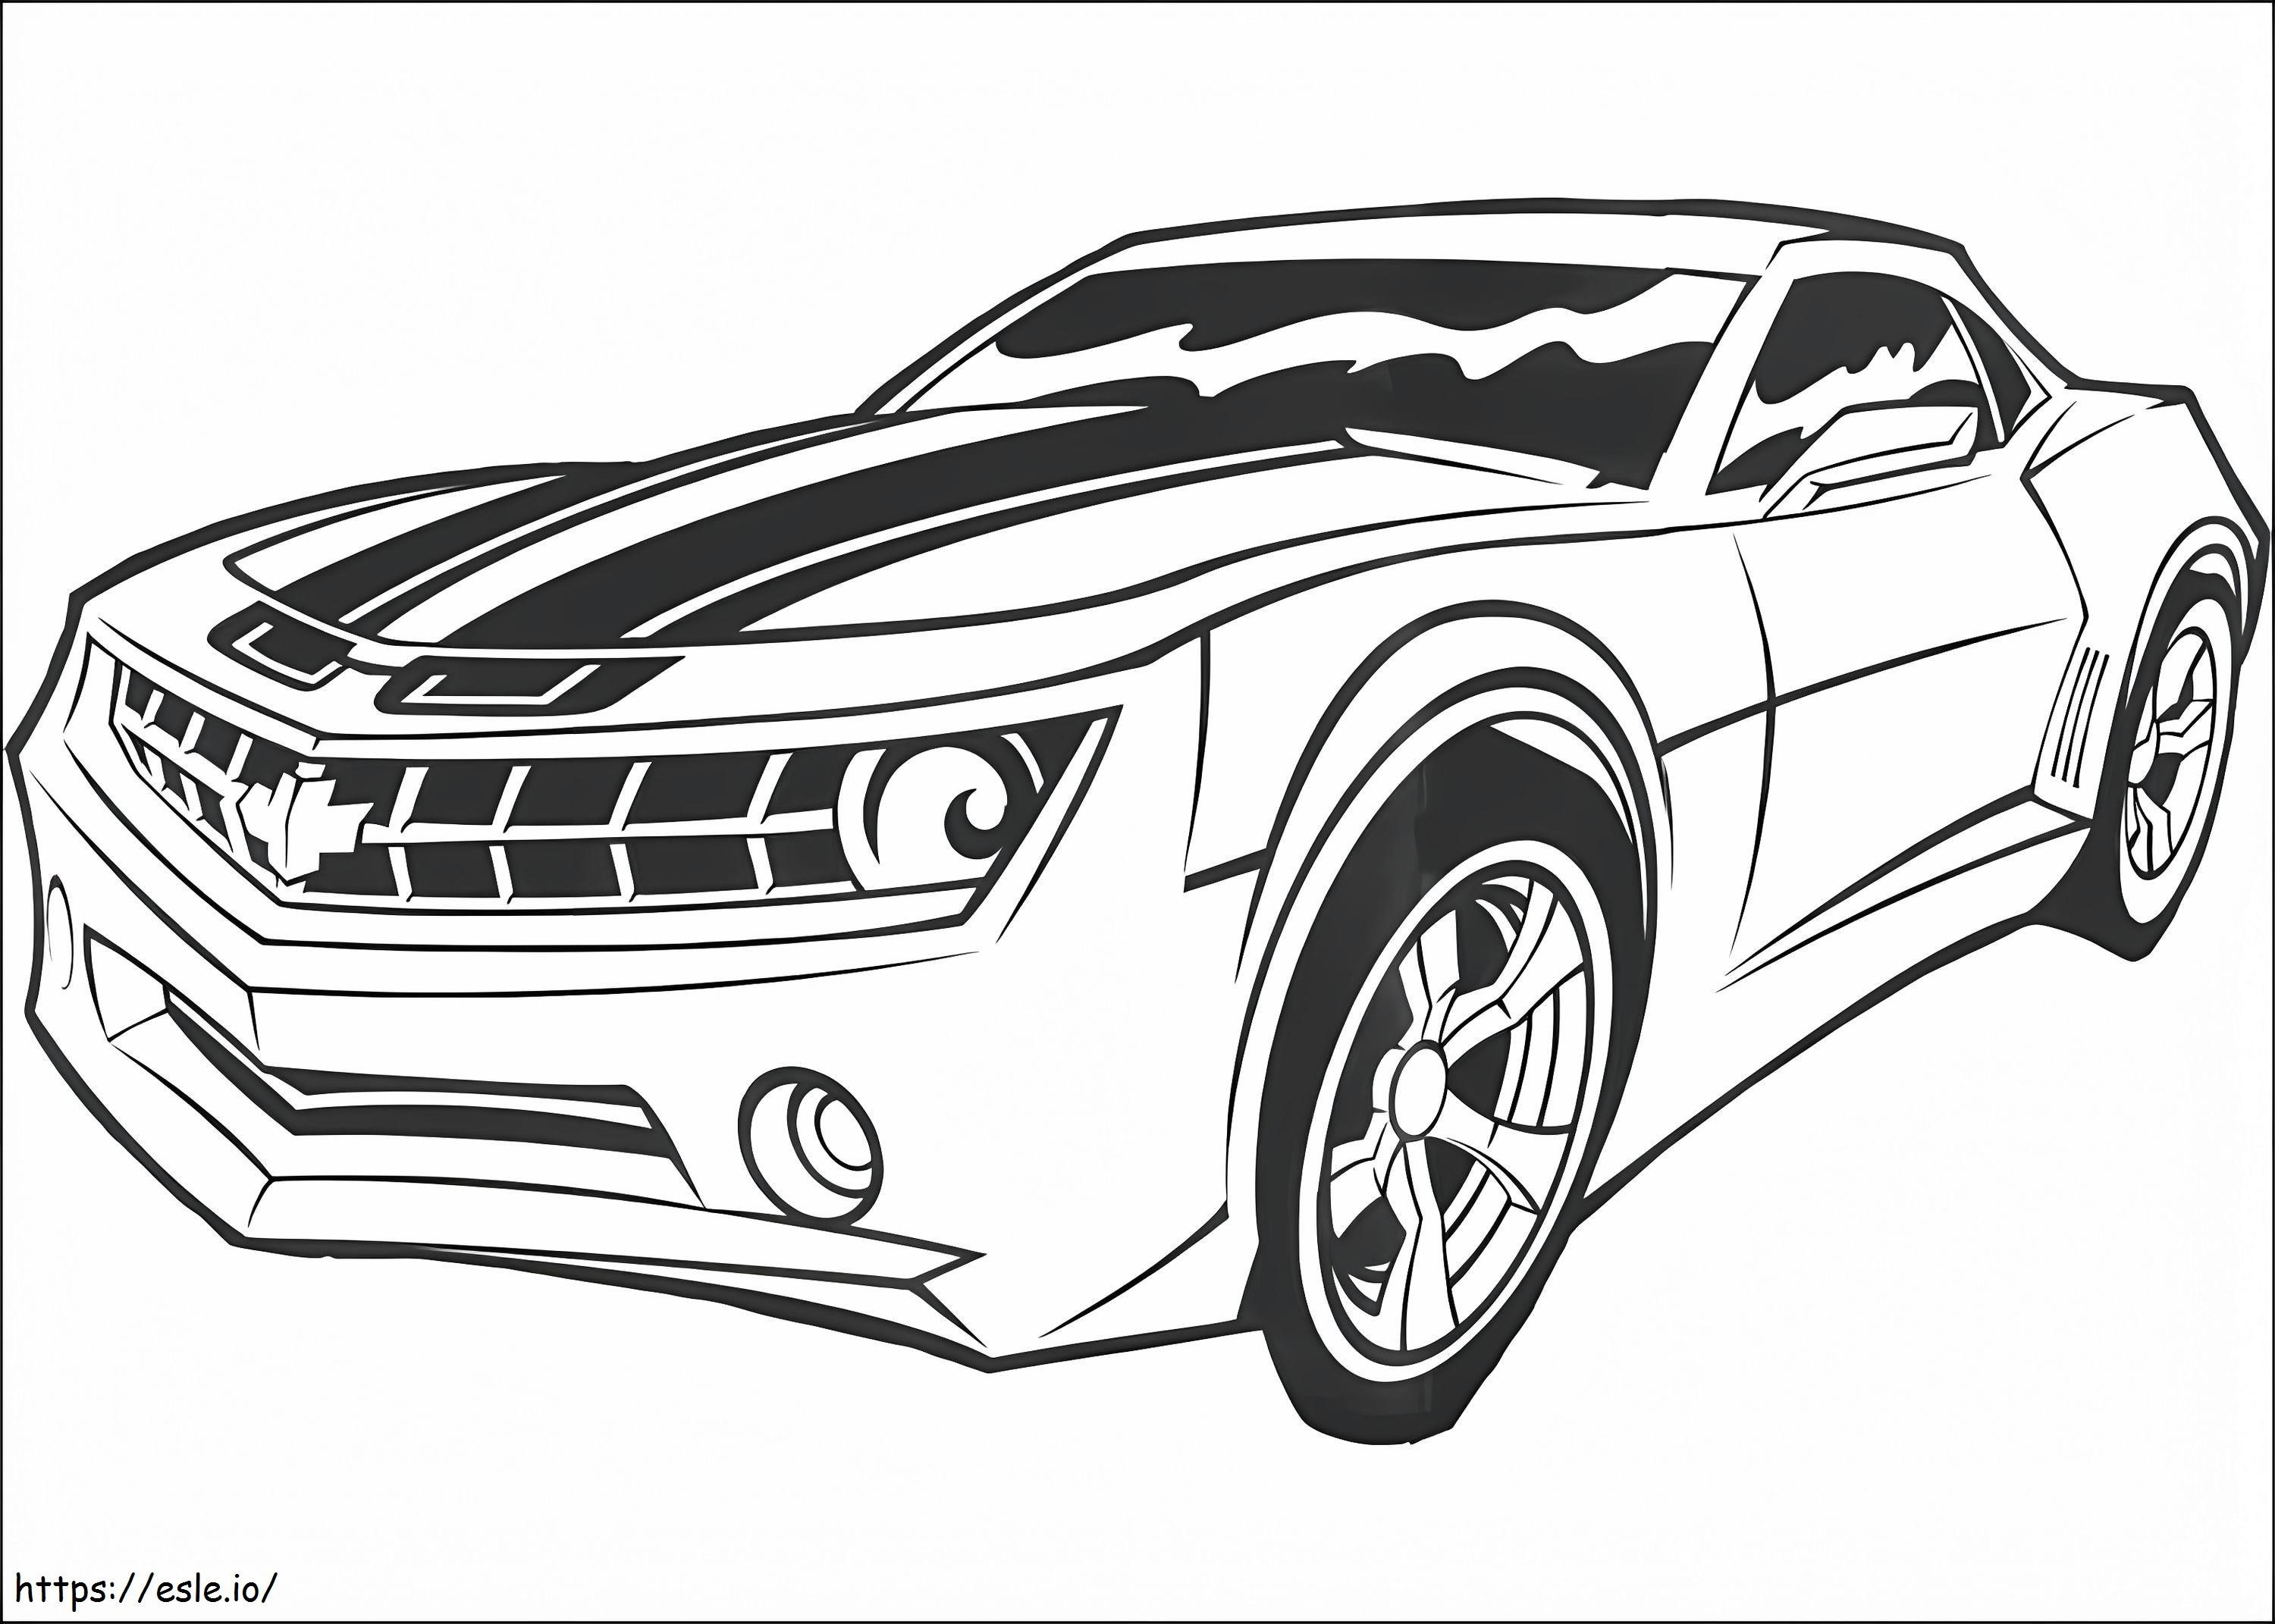 Bumblebee Car coloring page